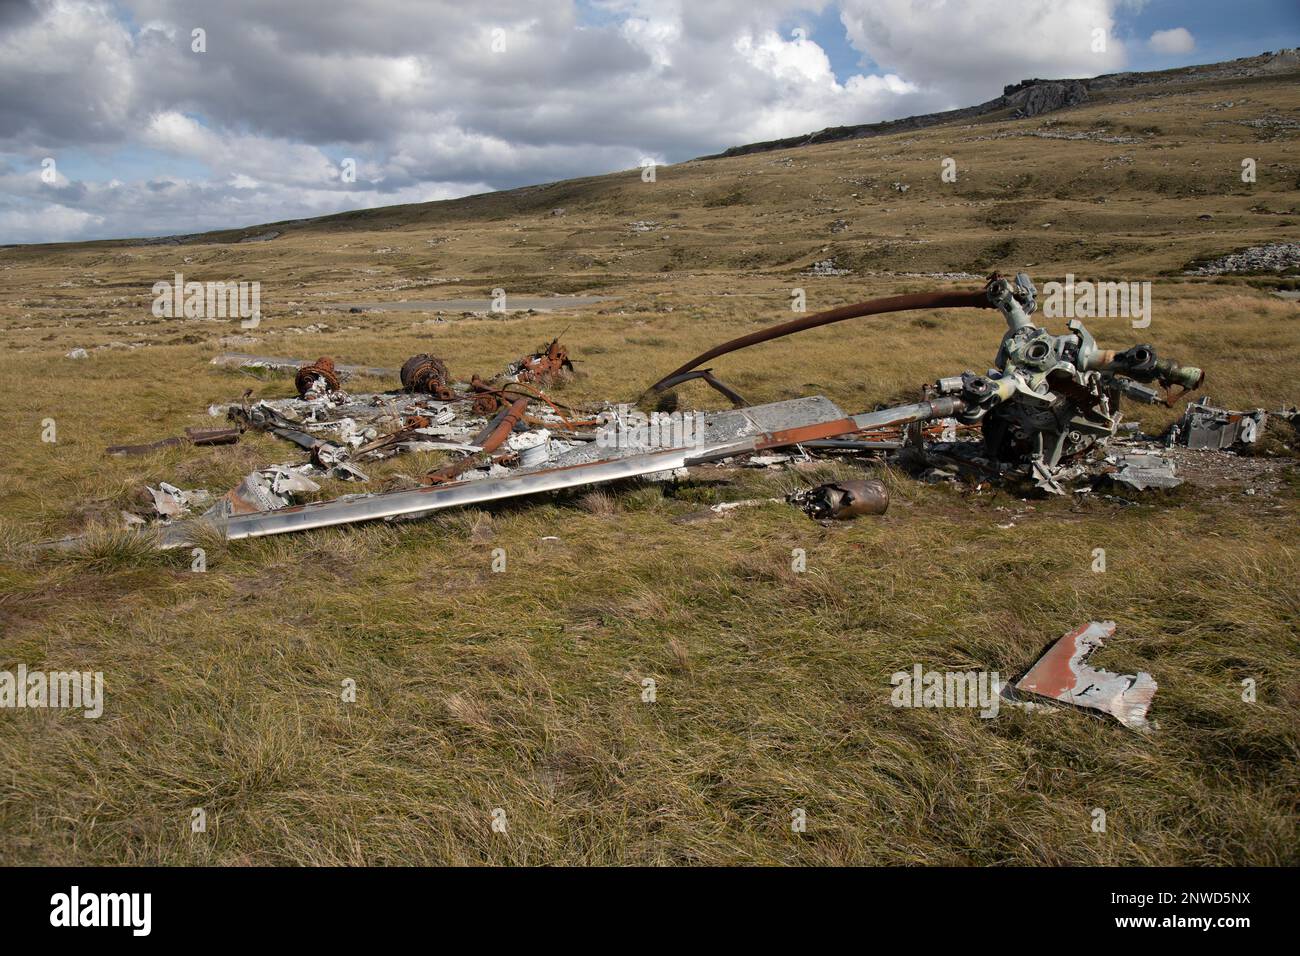 The wreckage of an Argentinian Air Force Chinook CH-47C Helicopter, destroyed by a Royal Air Force Harrier GR.3 on 21st May 1982. Falkland Islands. Stock Photo